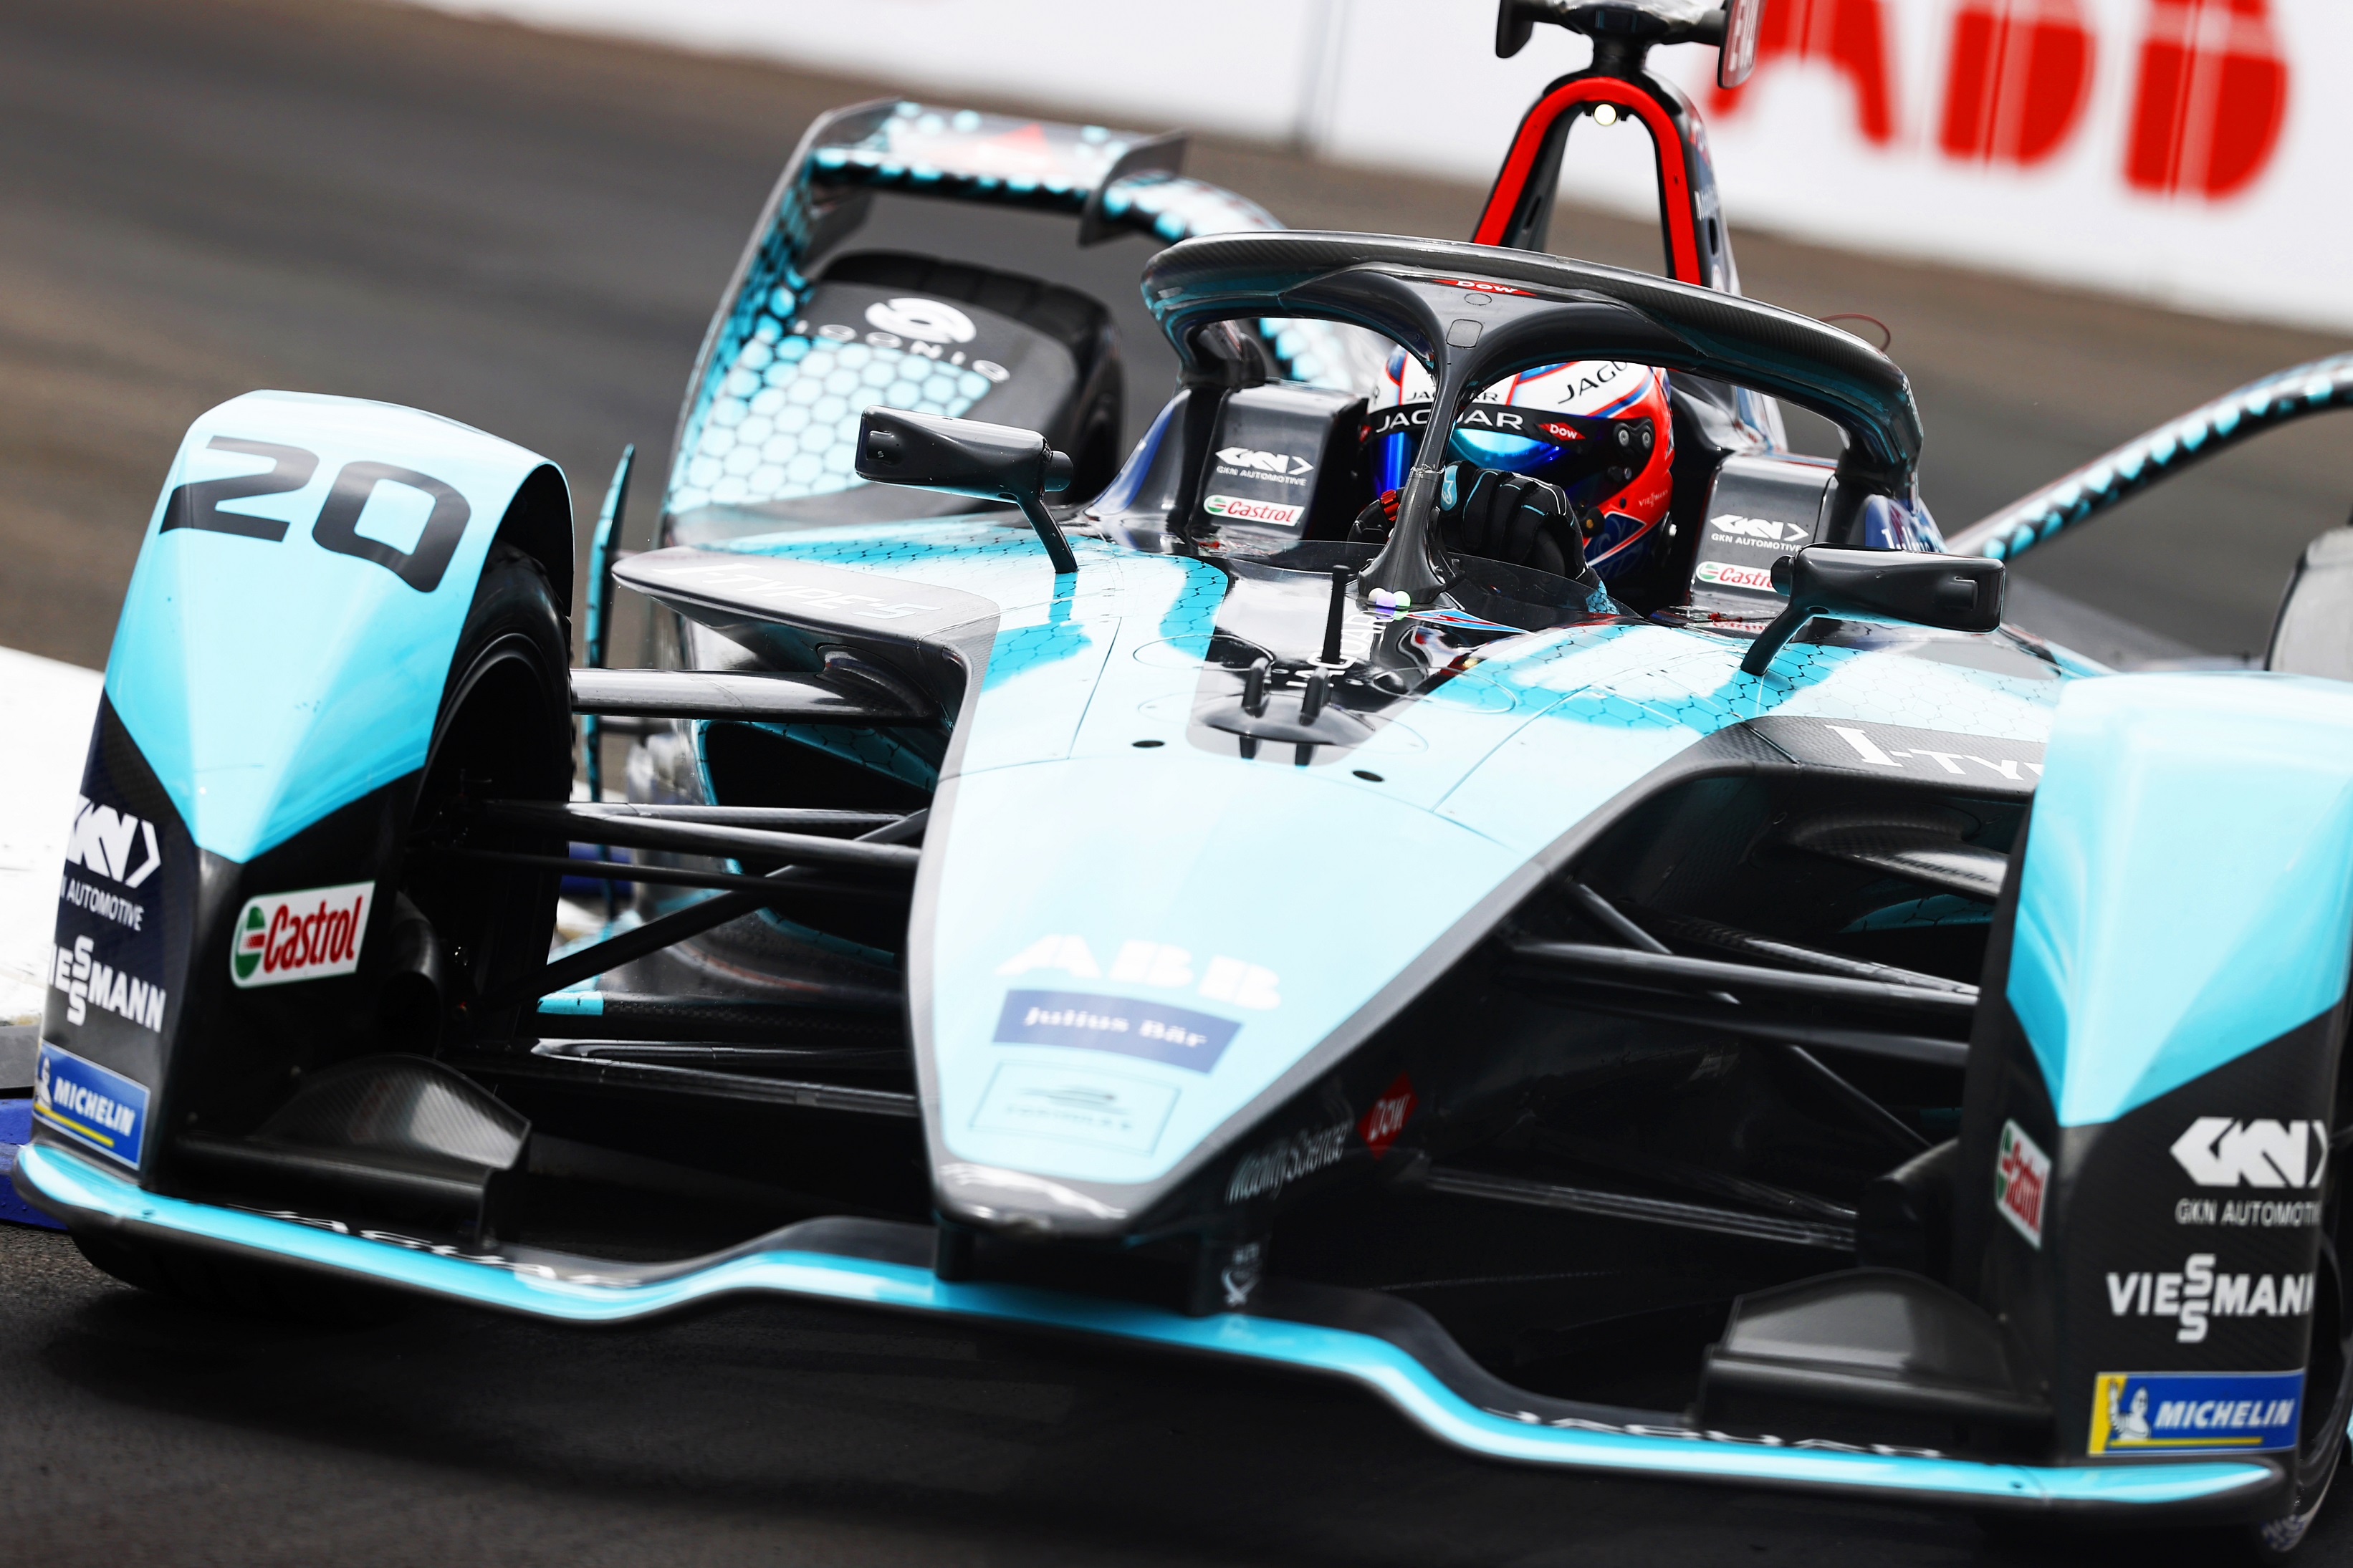 LONDON CALLING: JAGUAR RETURN TO RACE ON HOME SOIL AT THE HEINEKEN LONDON E-PRIX FOR THE FIRST TIME IN 17 YEARS